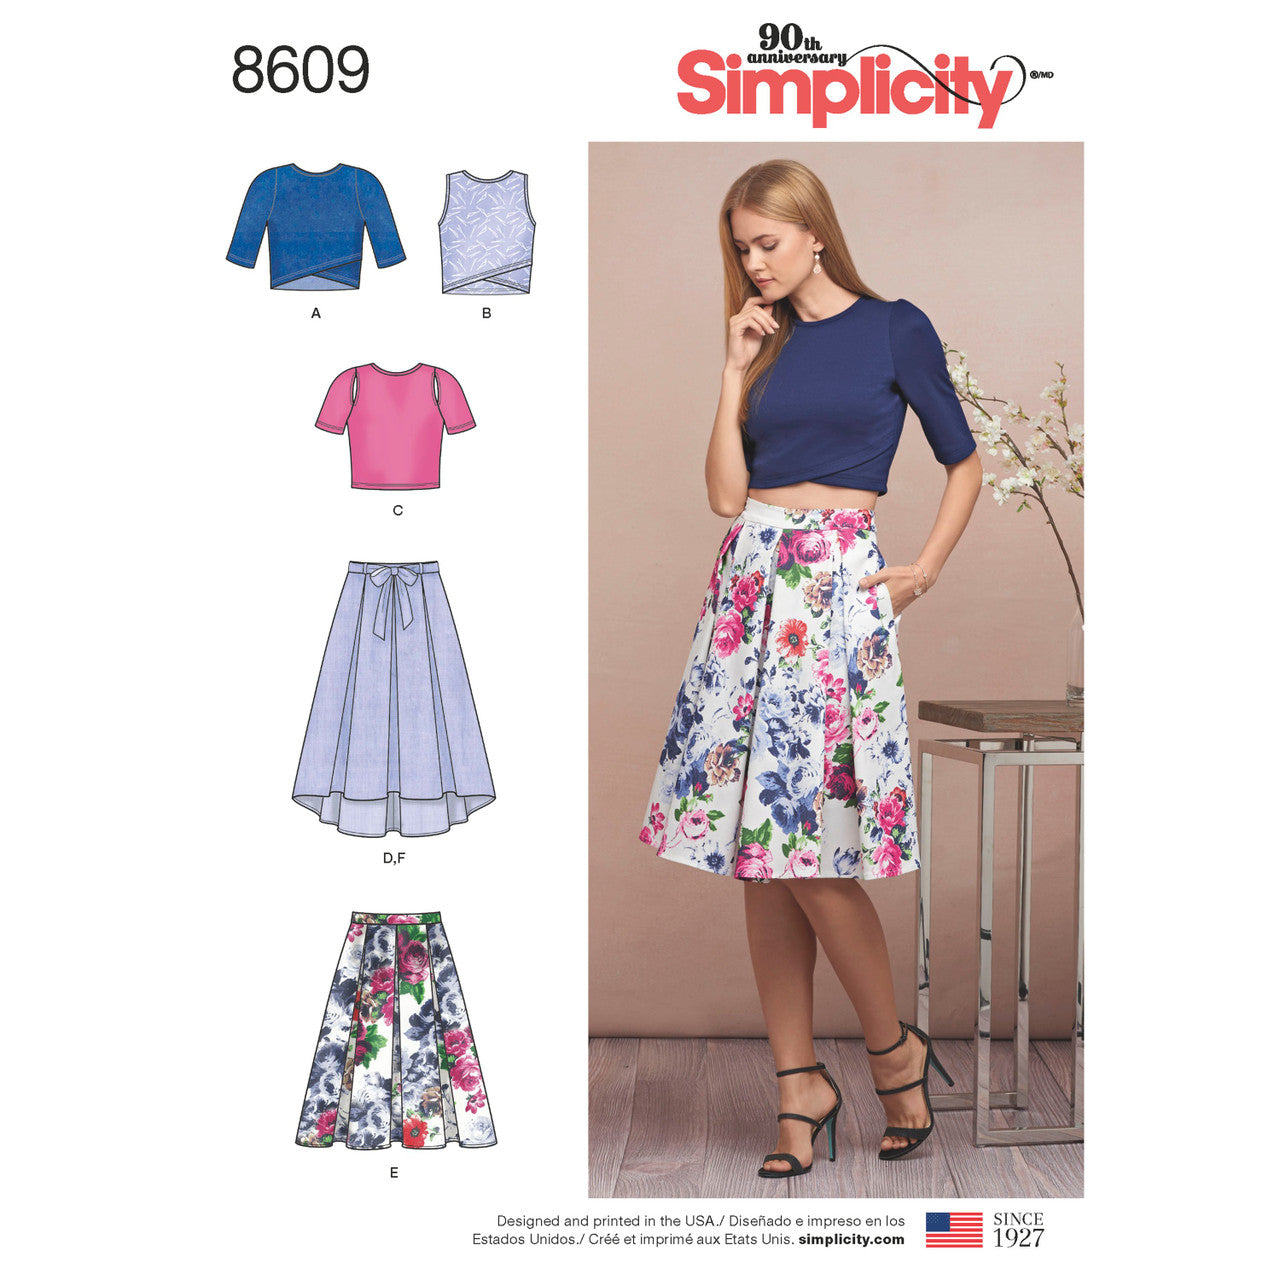 Misses' Skirts and Knit Tops S8609 Multi-Size Sewing Pattern